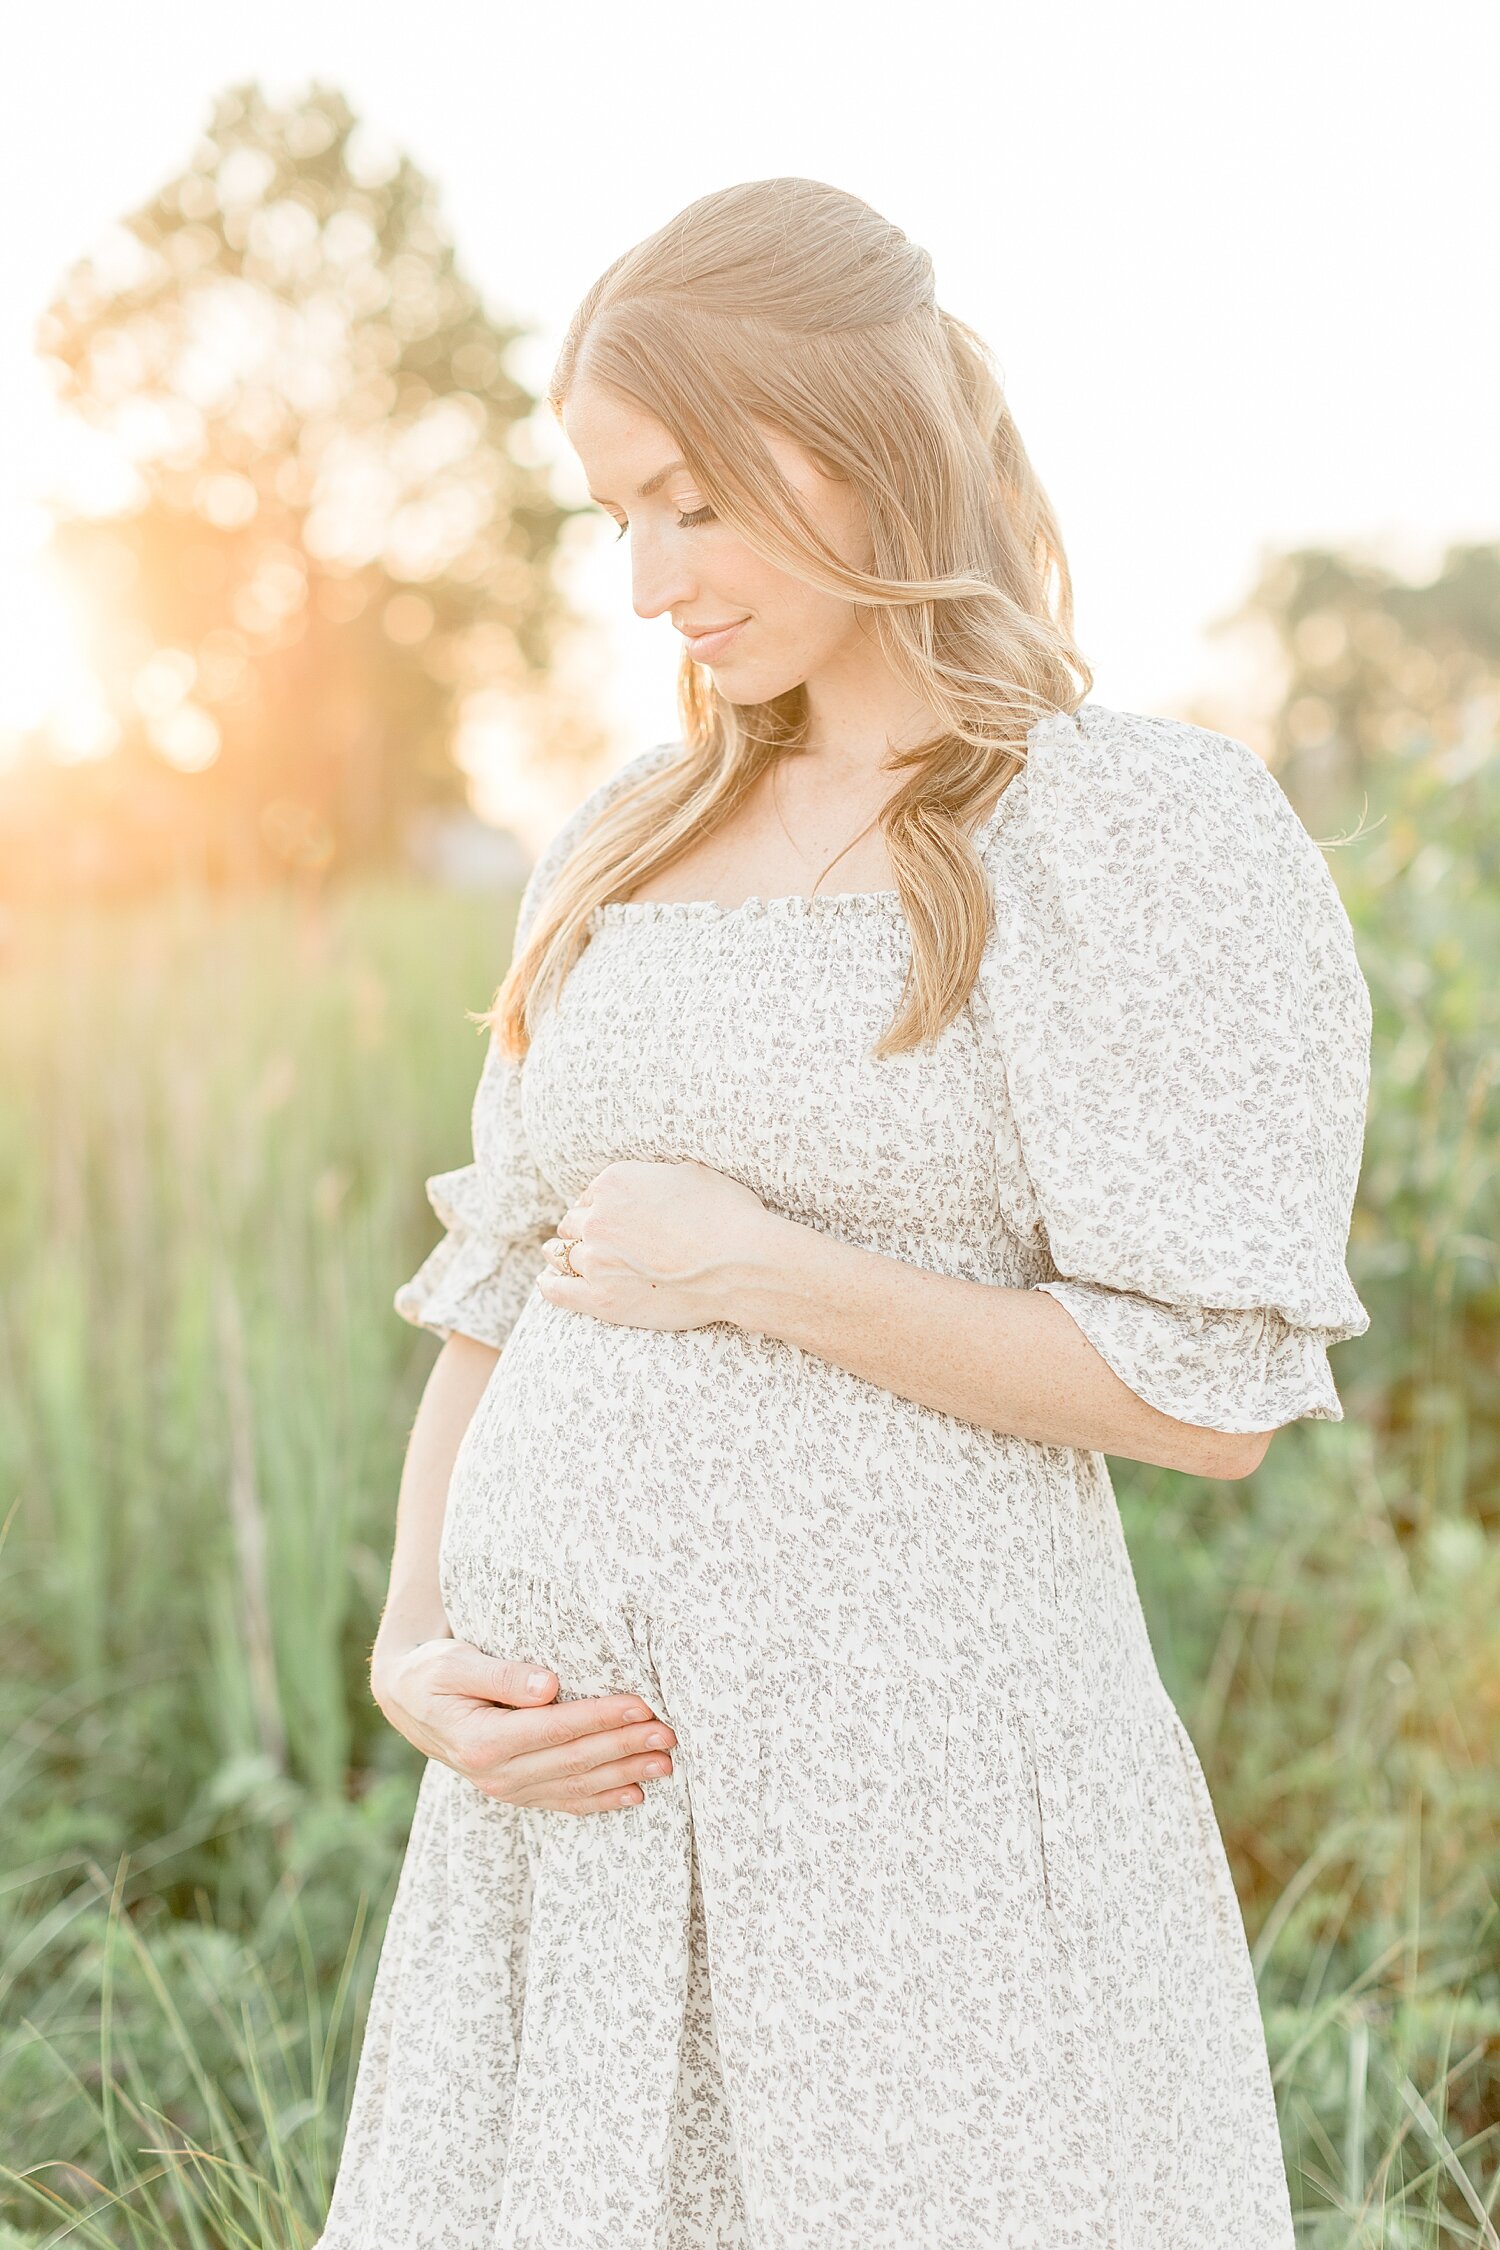 Sunset beach maternity session at Sherwood Island State Park in CT | Kristin Wood Photography